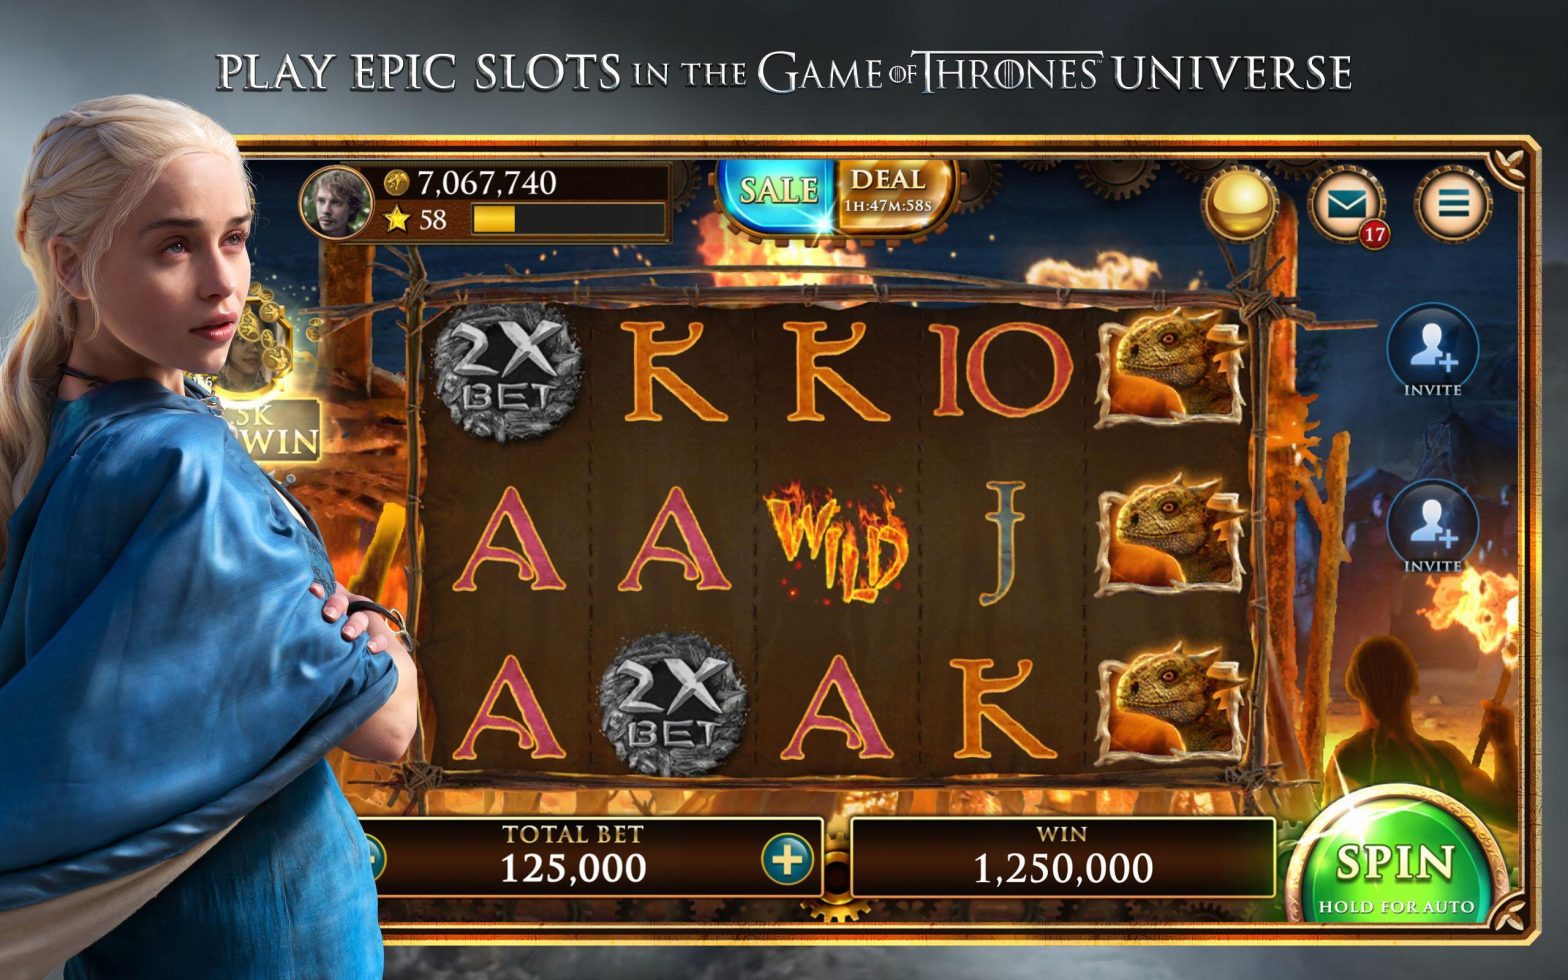 where can i play game of thrones slot machine